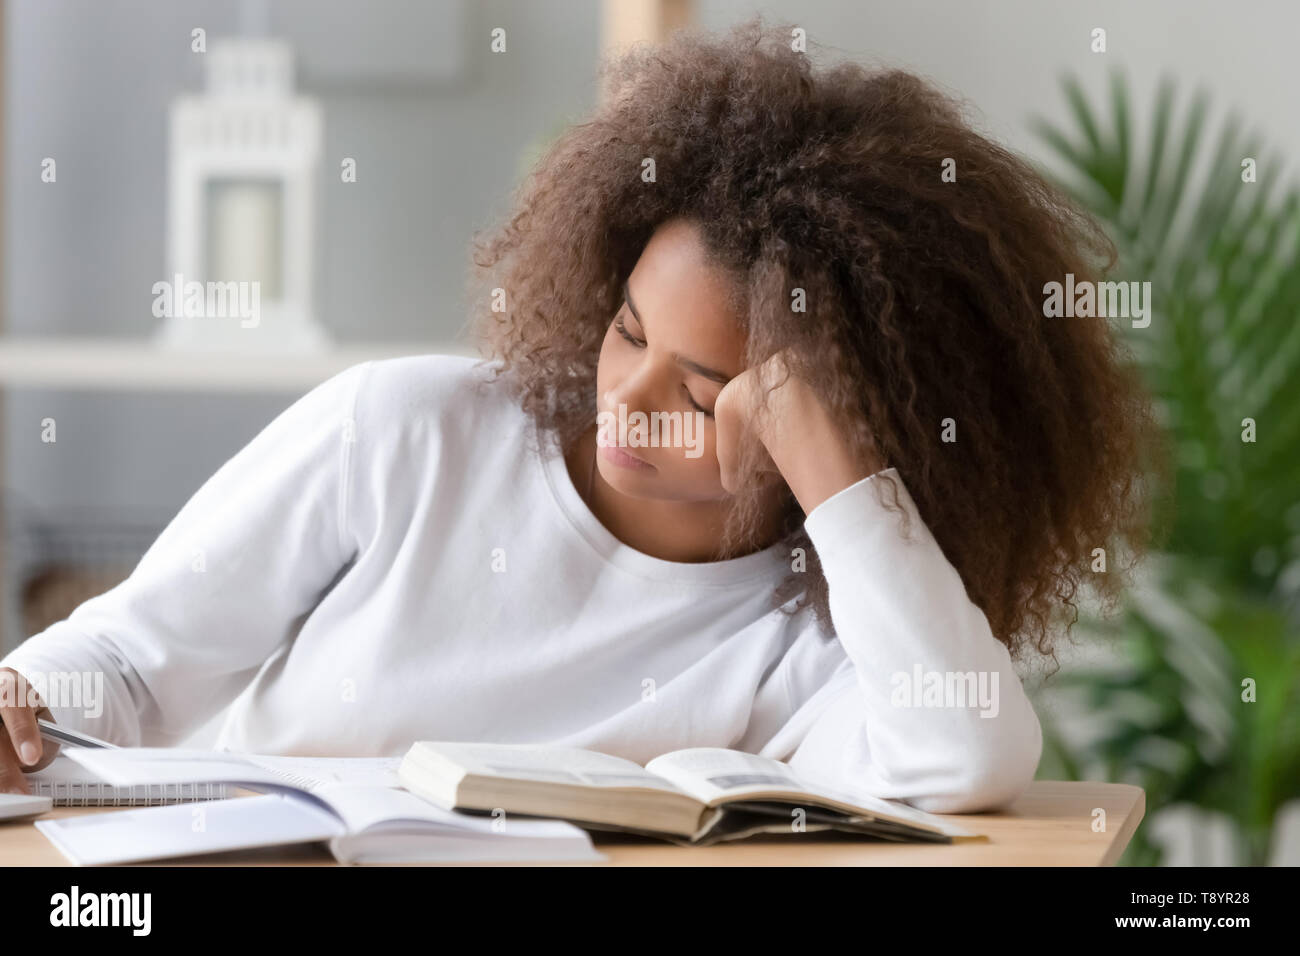 Bored African American teenage girl doing school tasks at home Stock Photo